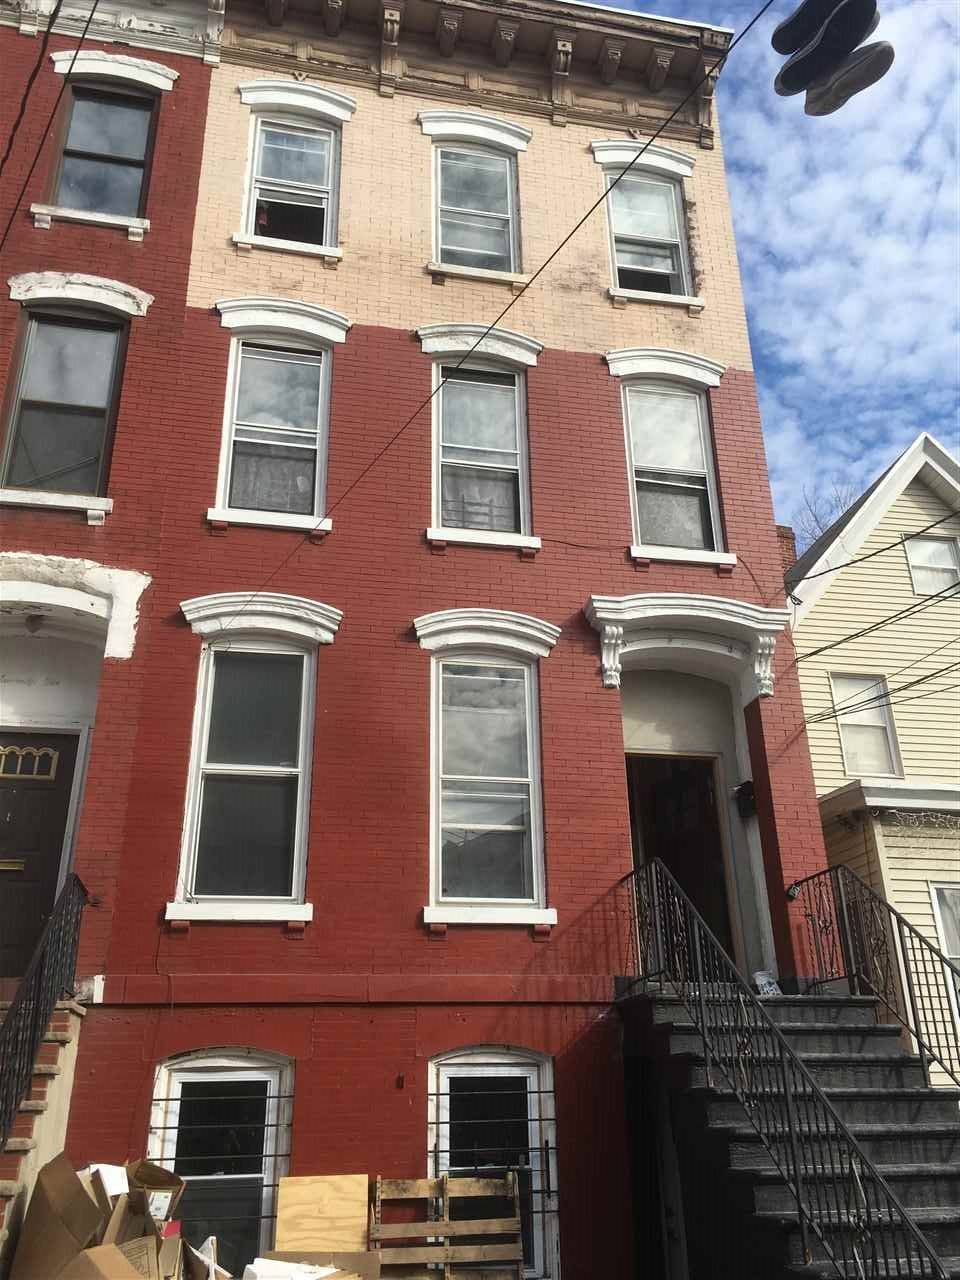 3 Bed / 1 Bath Apartment in McGinnley Square Available ASAP